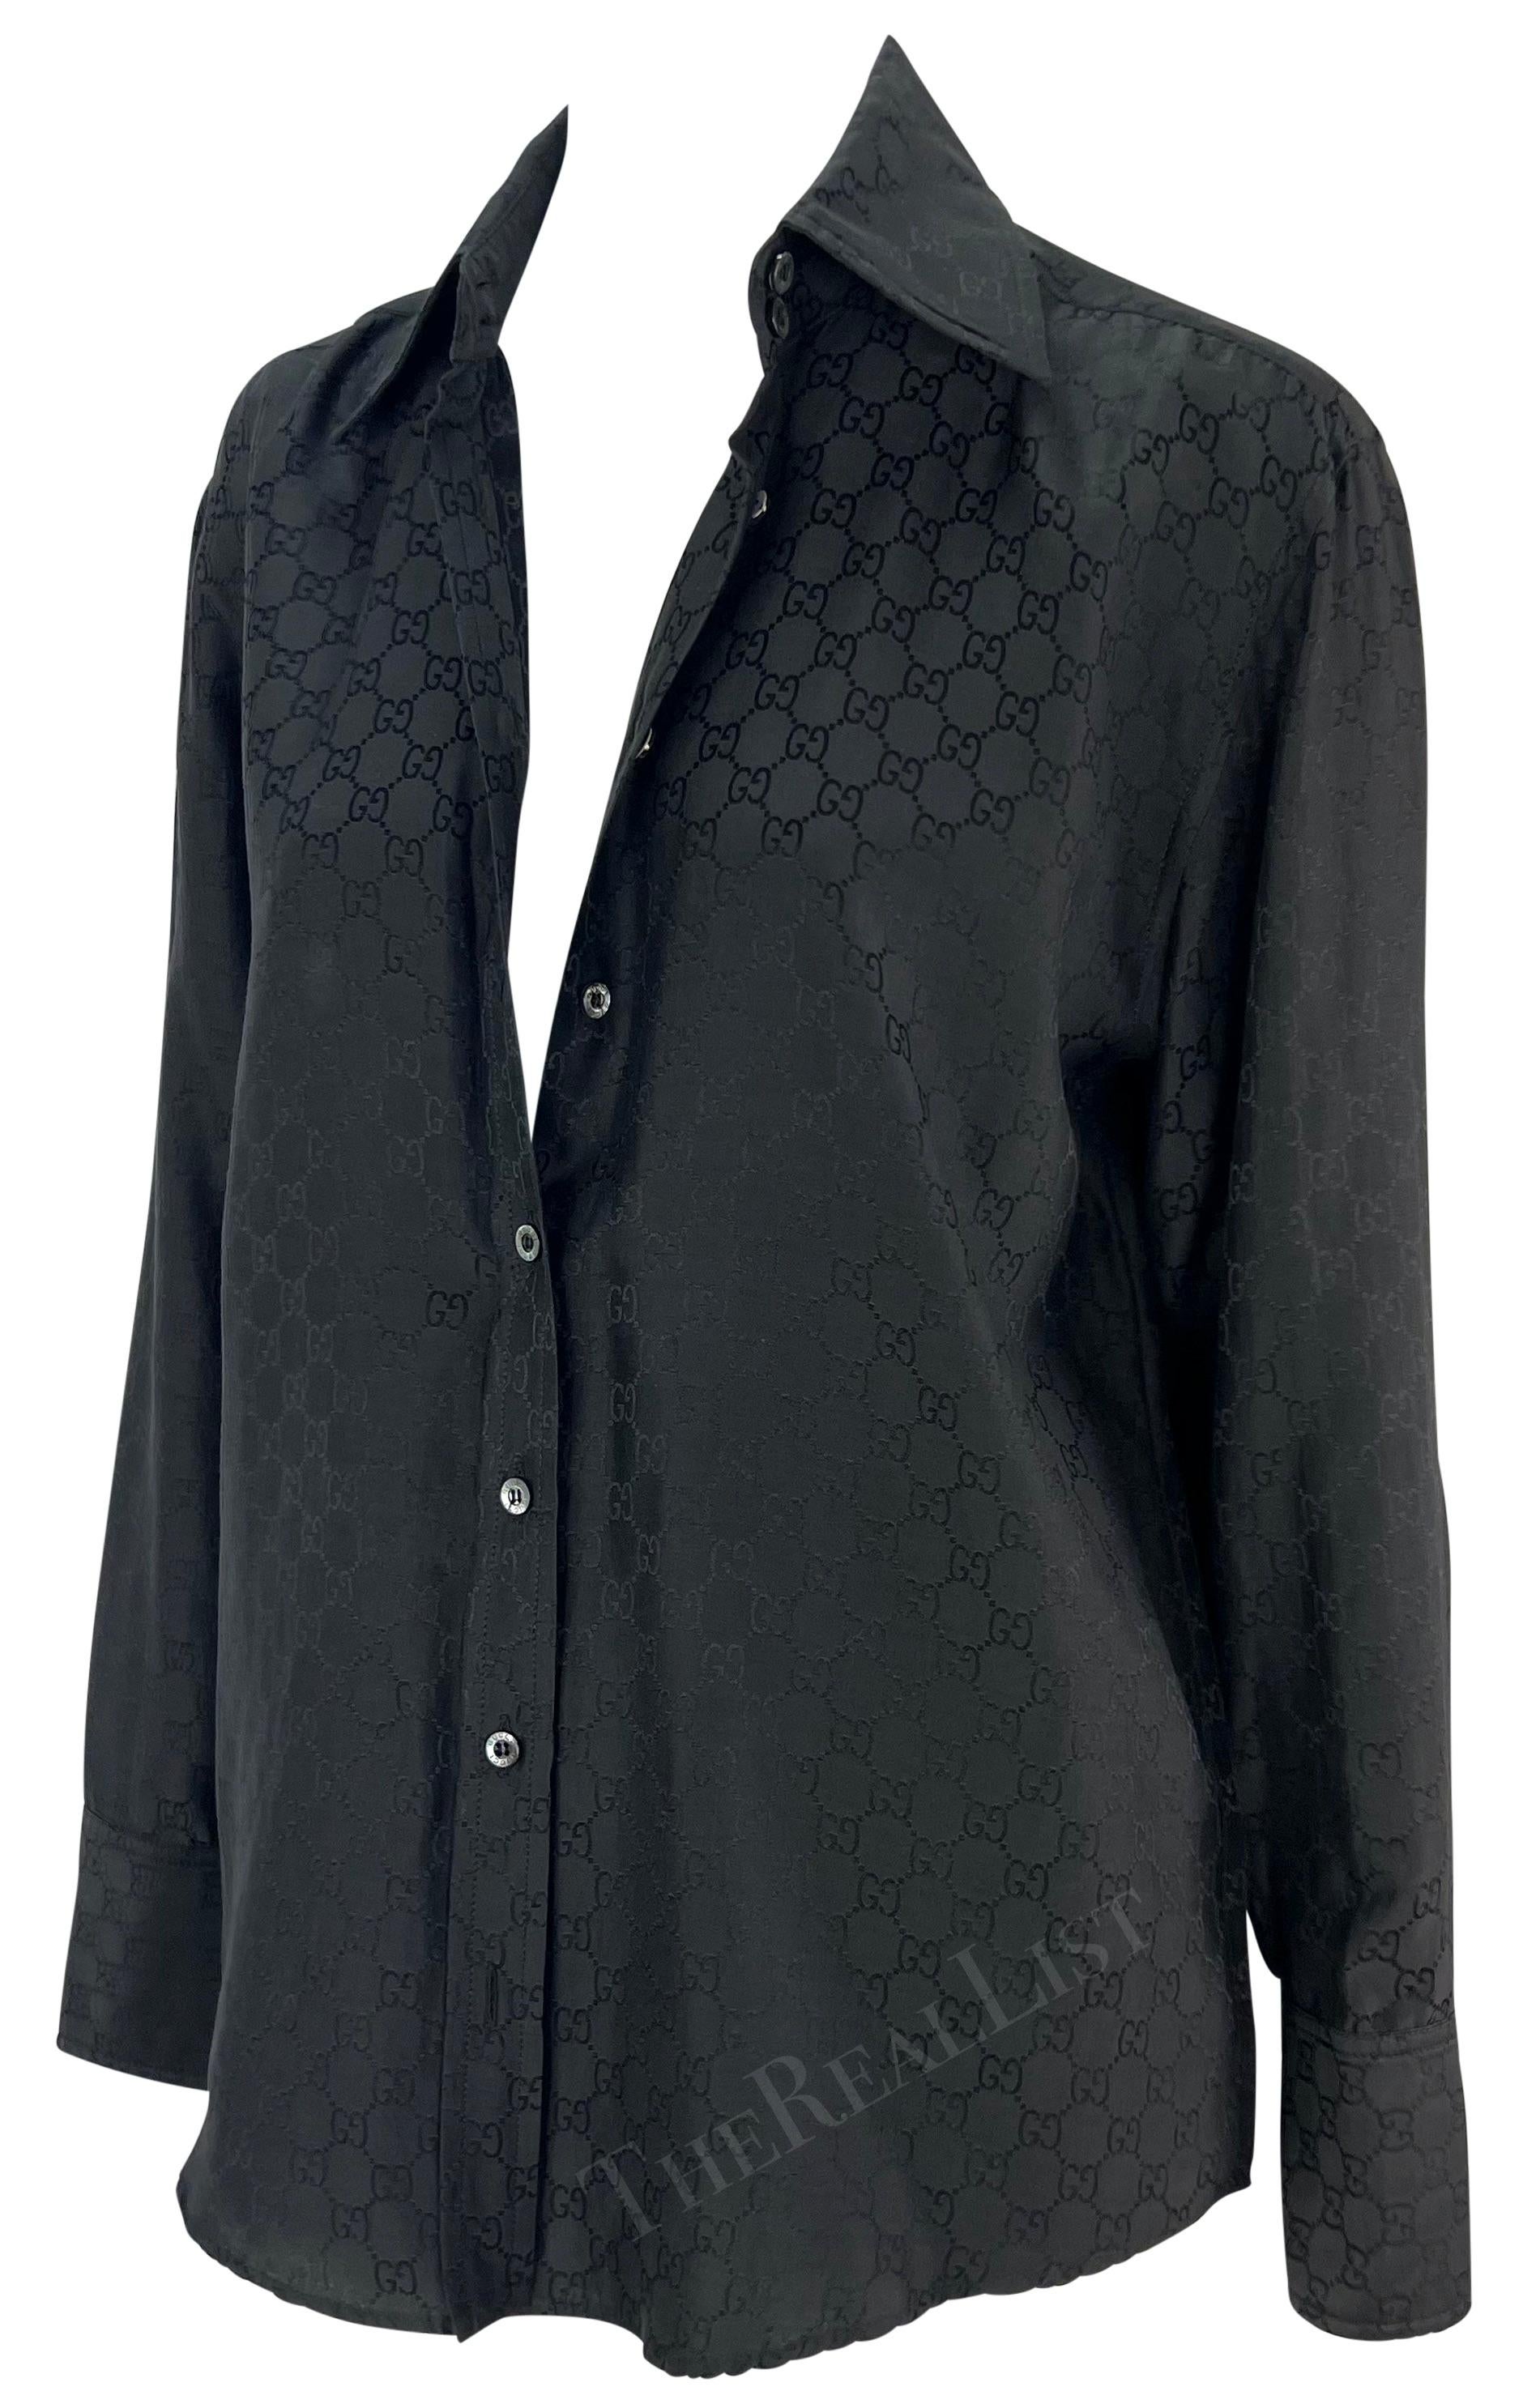 S/S 1998 Gucci by Tom Ford Black 'GG' Monogram Button Down Collar Shirt In Good Condition For Sale In West Hollywood, CA